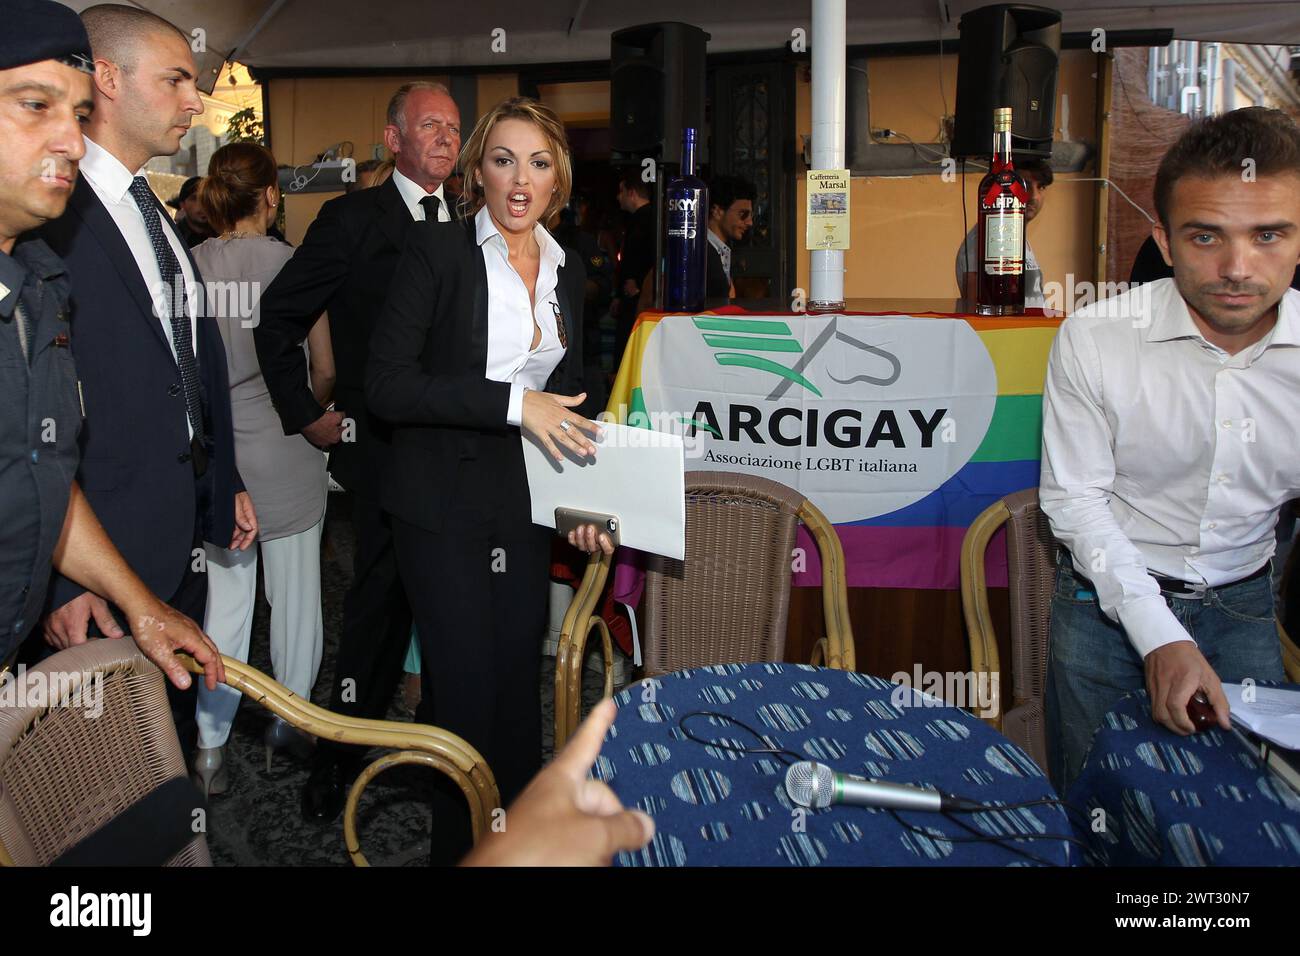 Francesca Pascale arrives at the ArciGay press conference to get the tiles Stock Photo